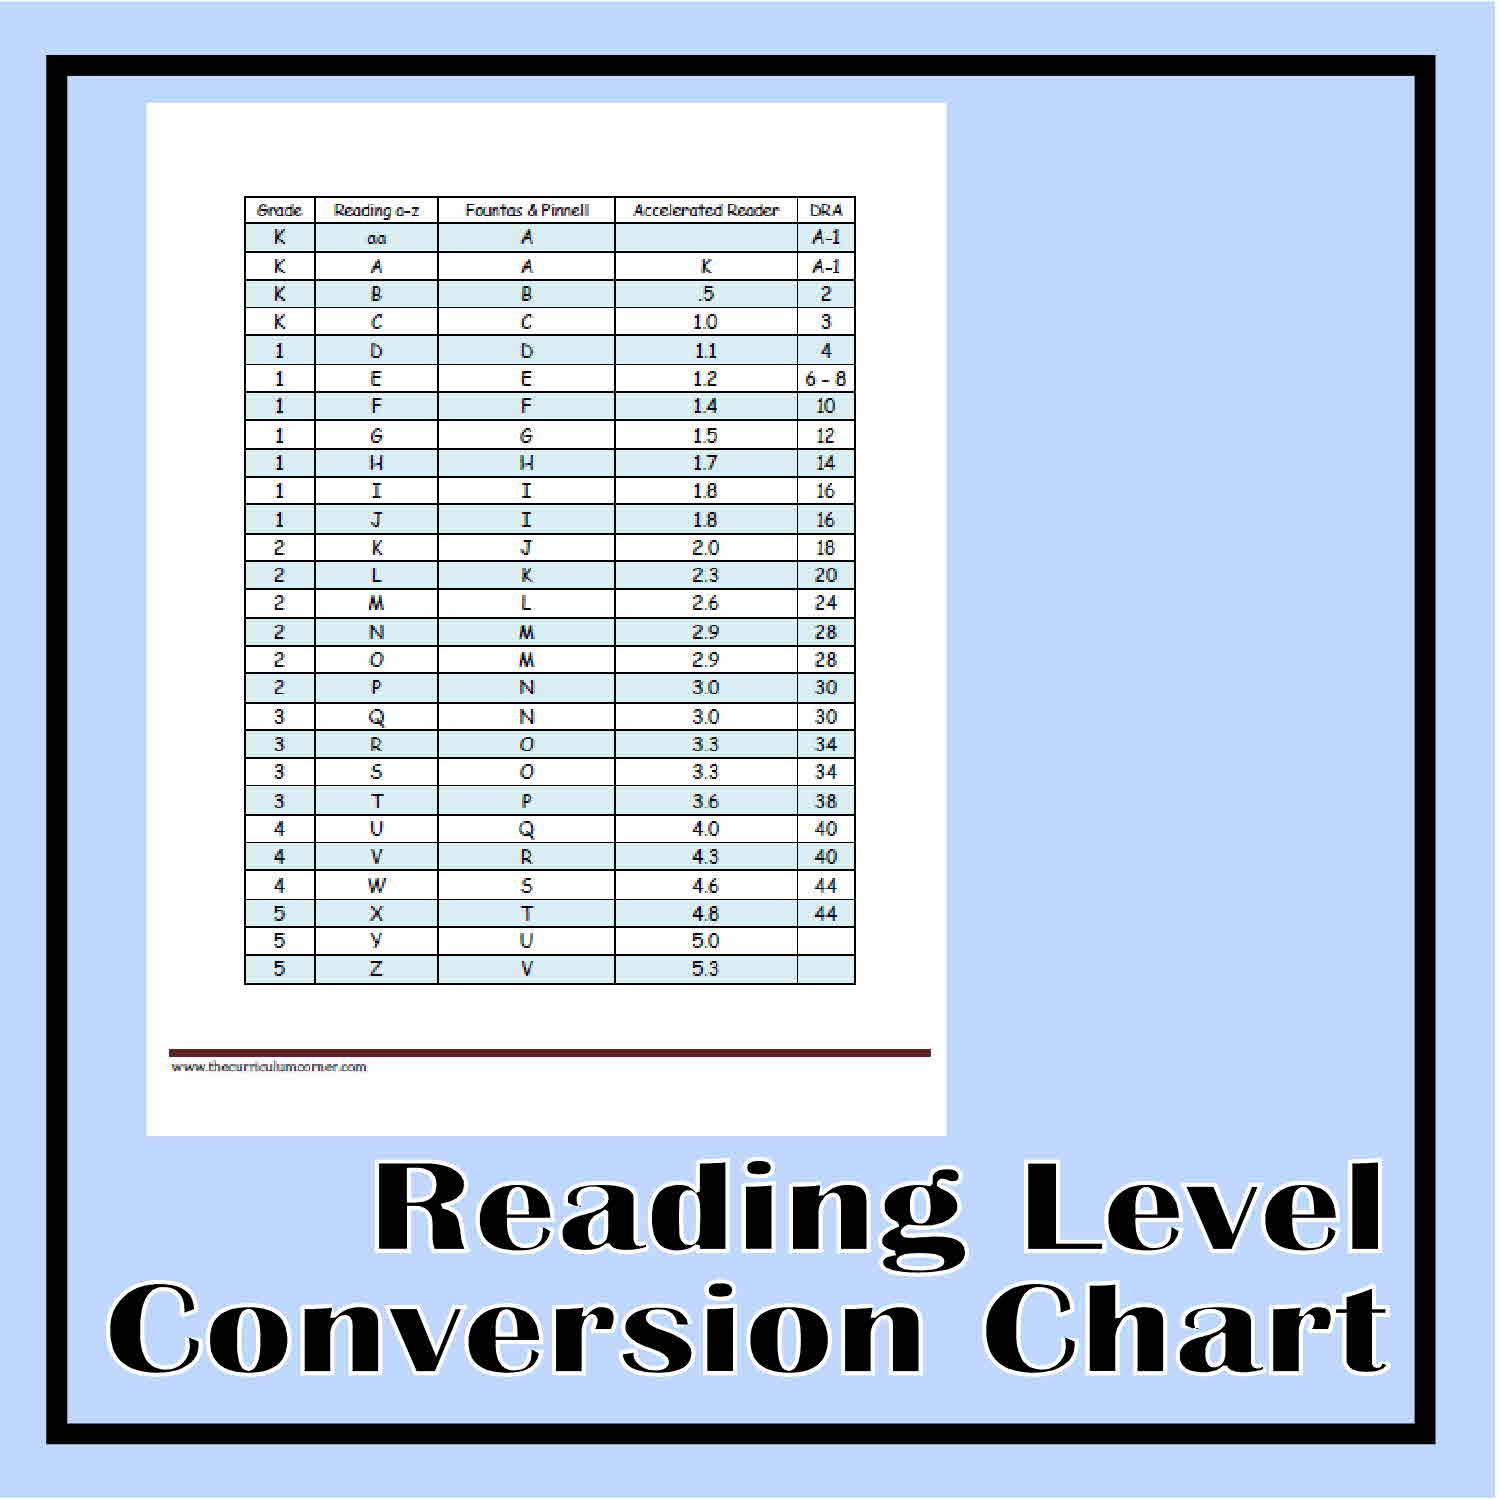 Book Level To Reading Level Conversion Chart